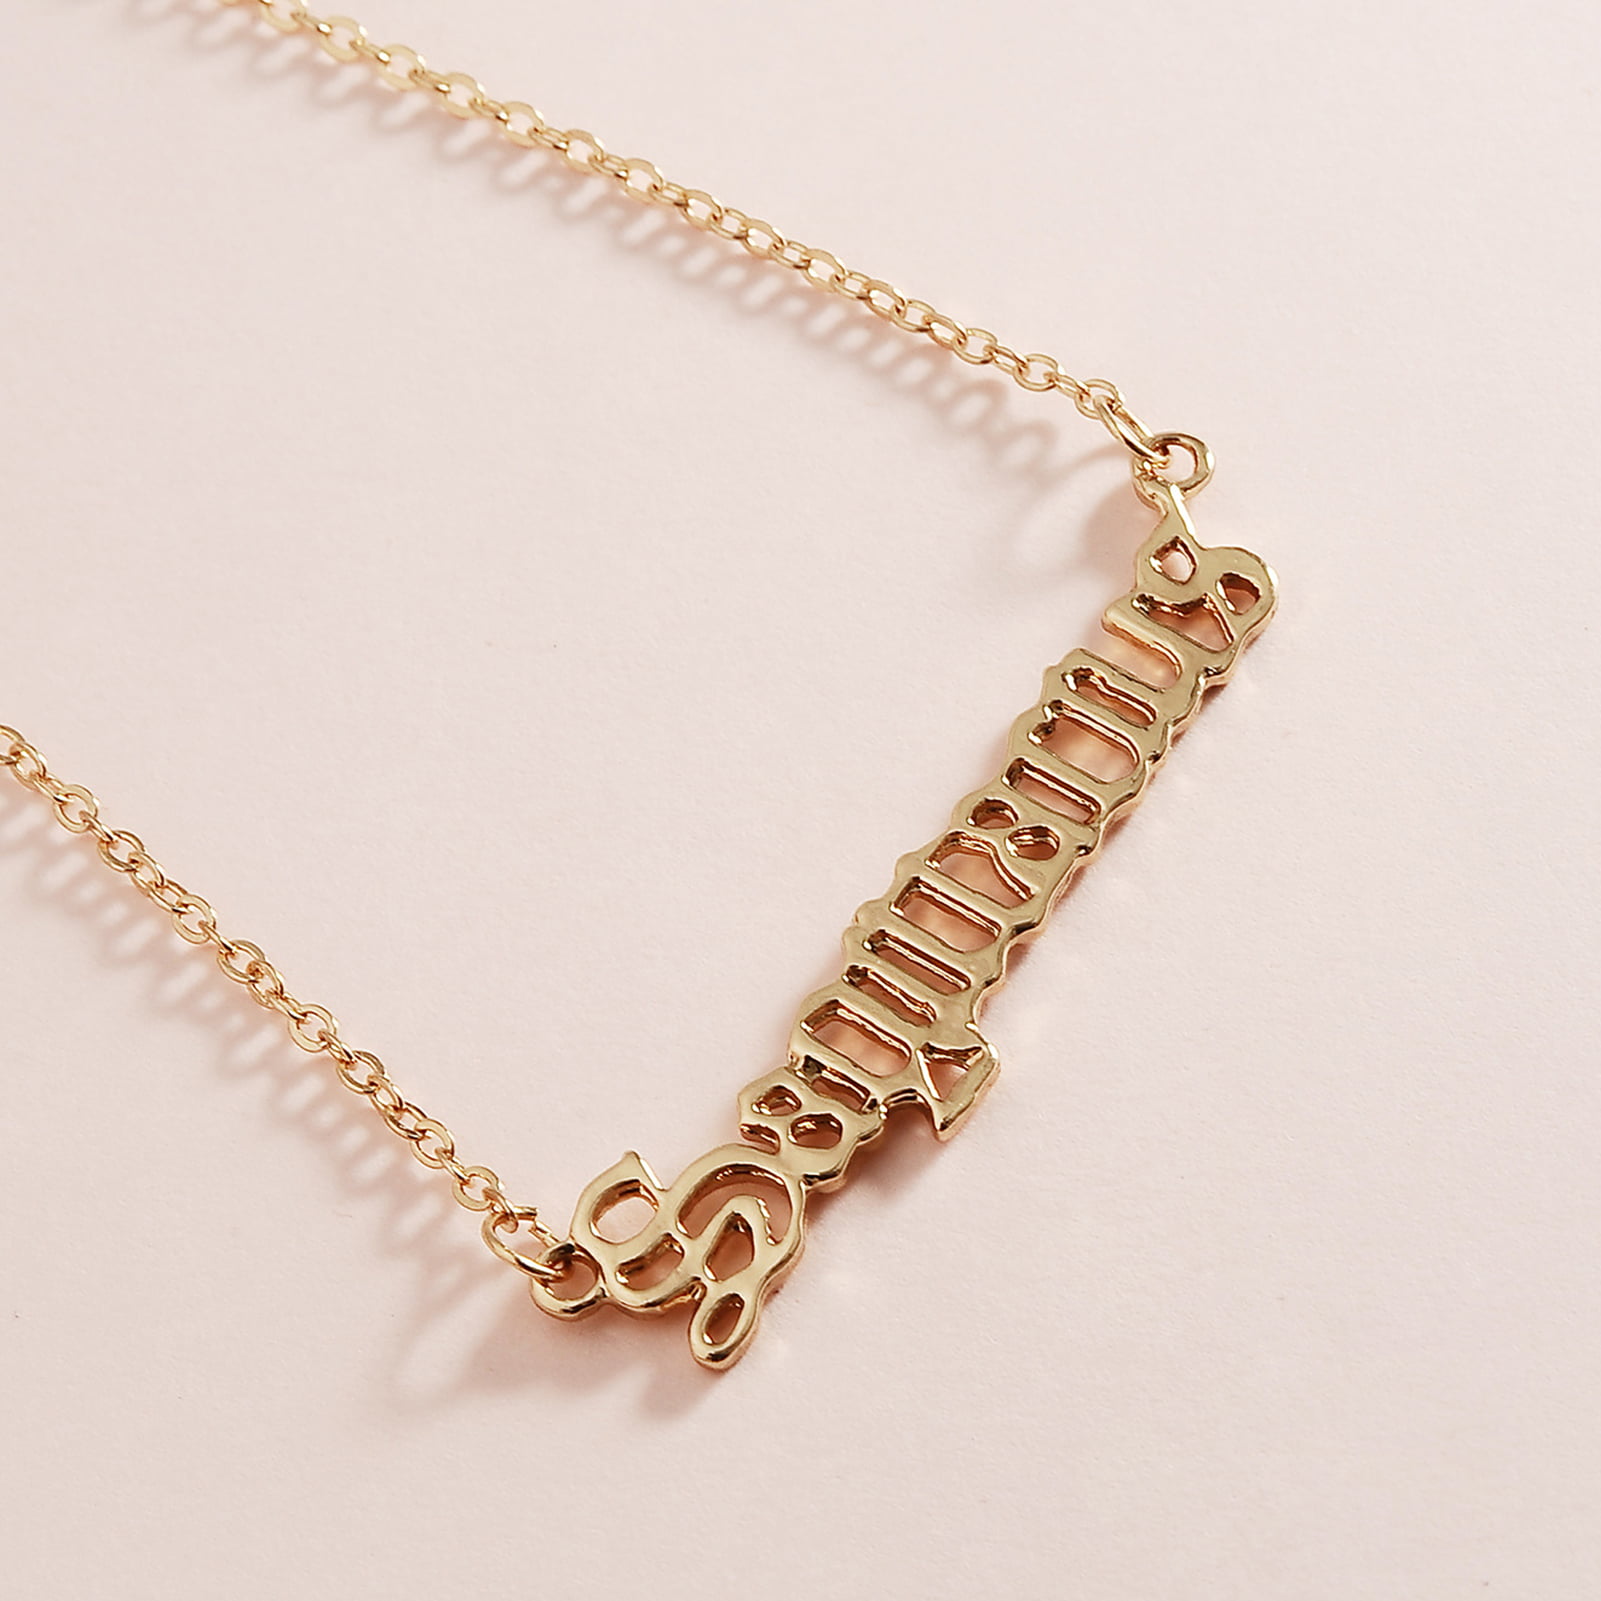 Details about   14K White Solid Gold Mirror Box Chain Width 0.8mm